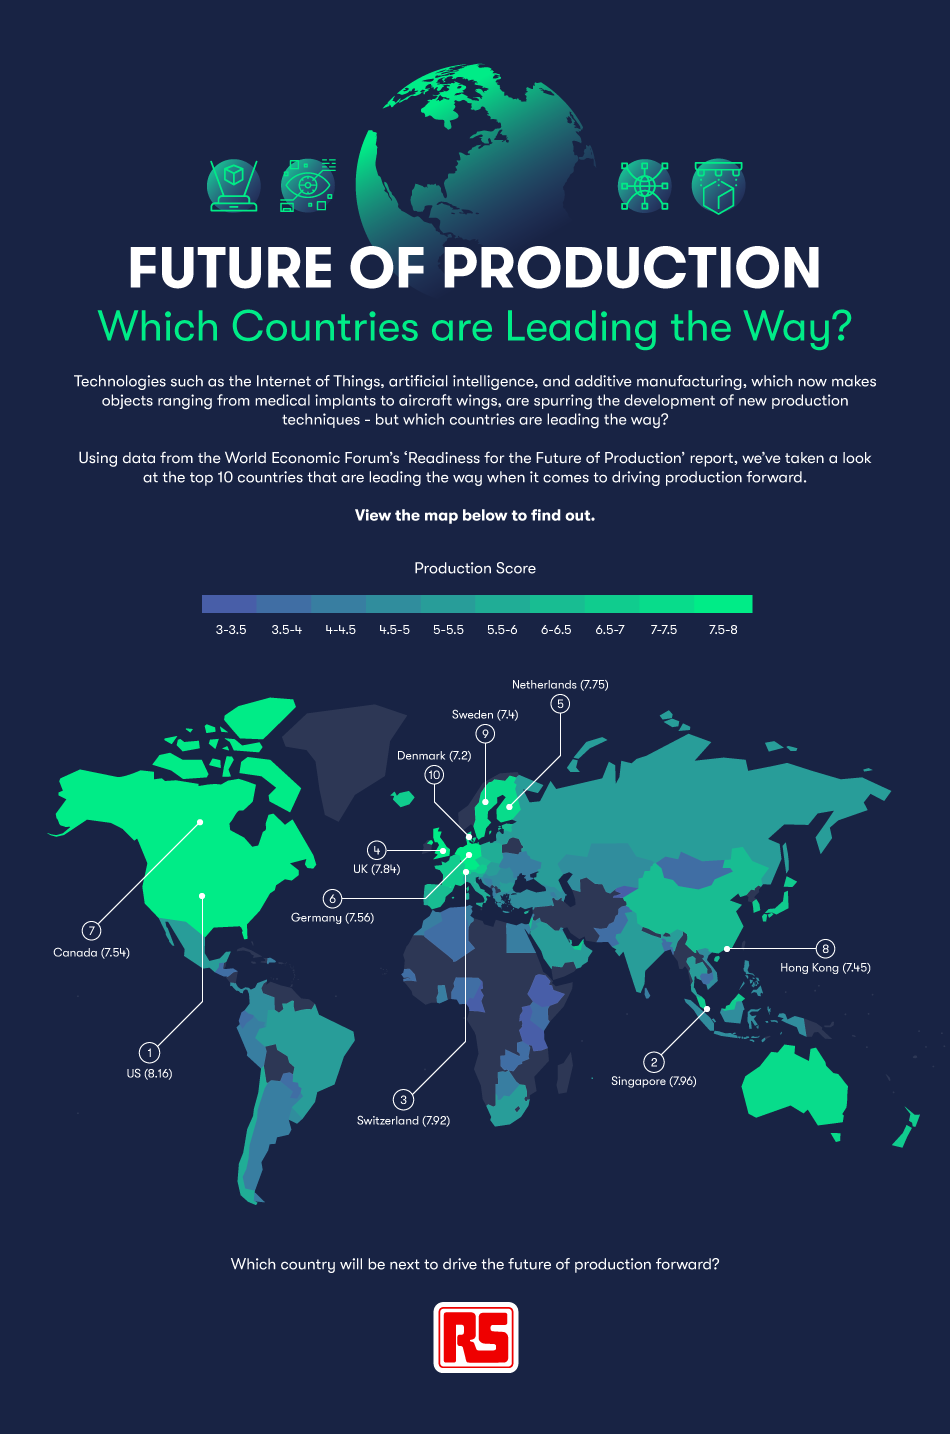 Future of production infographic